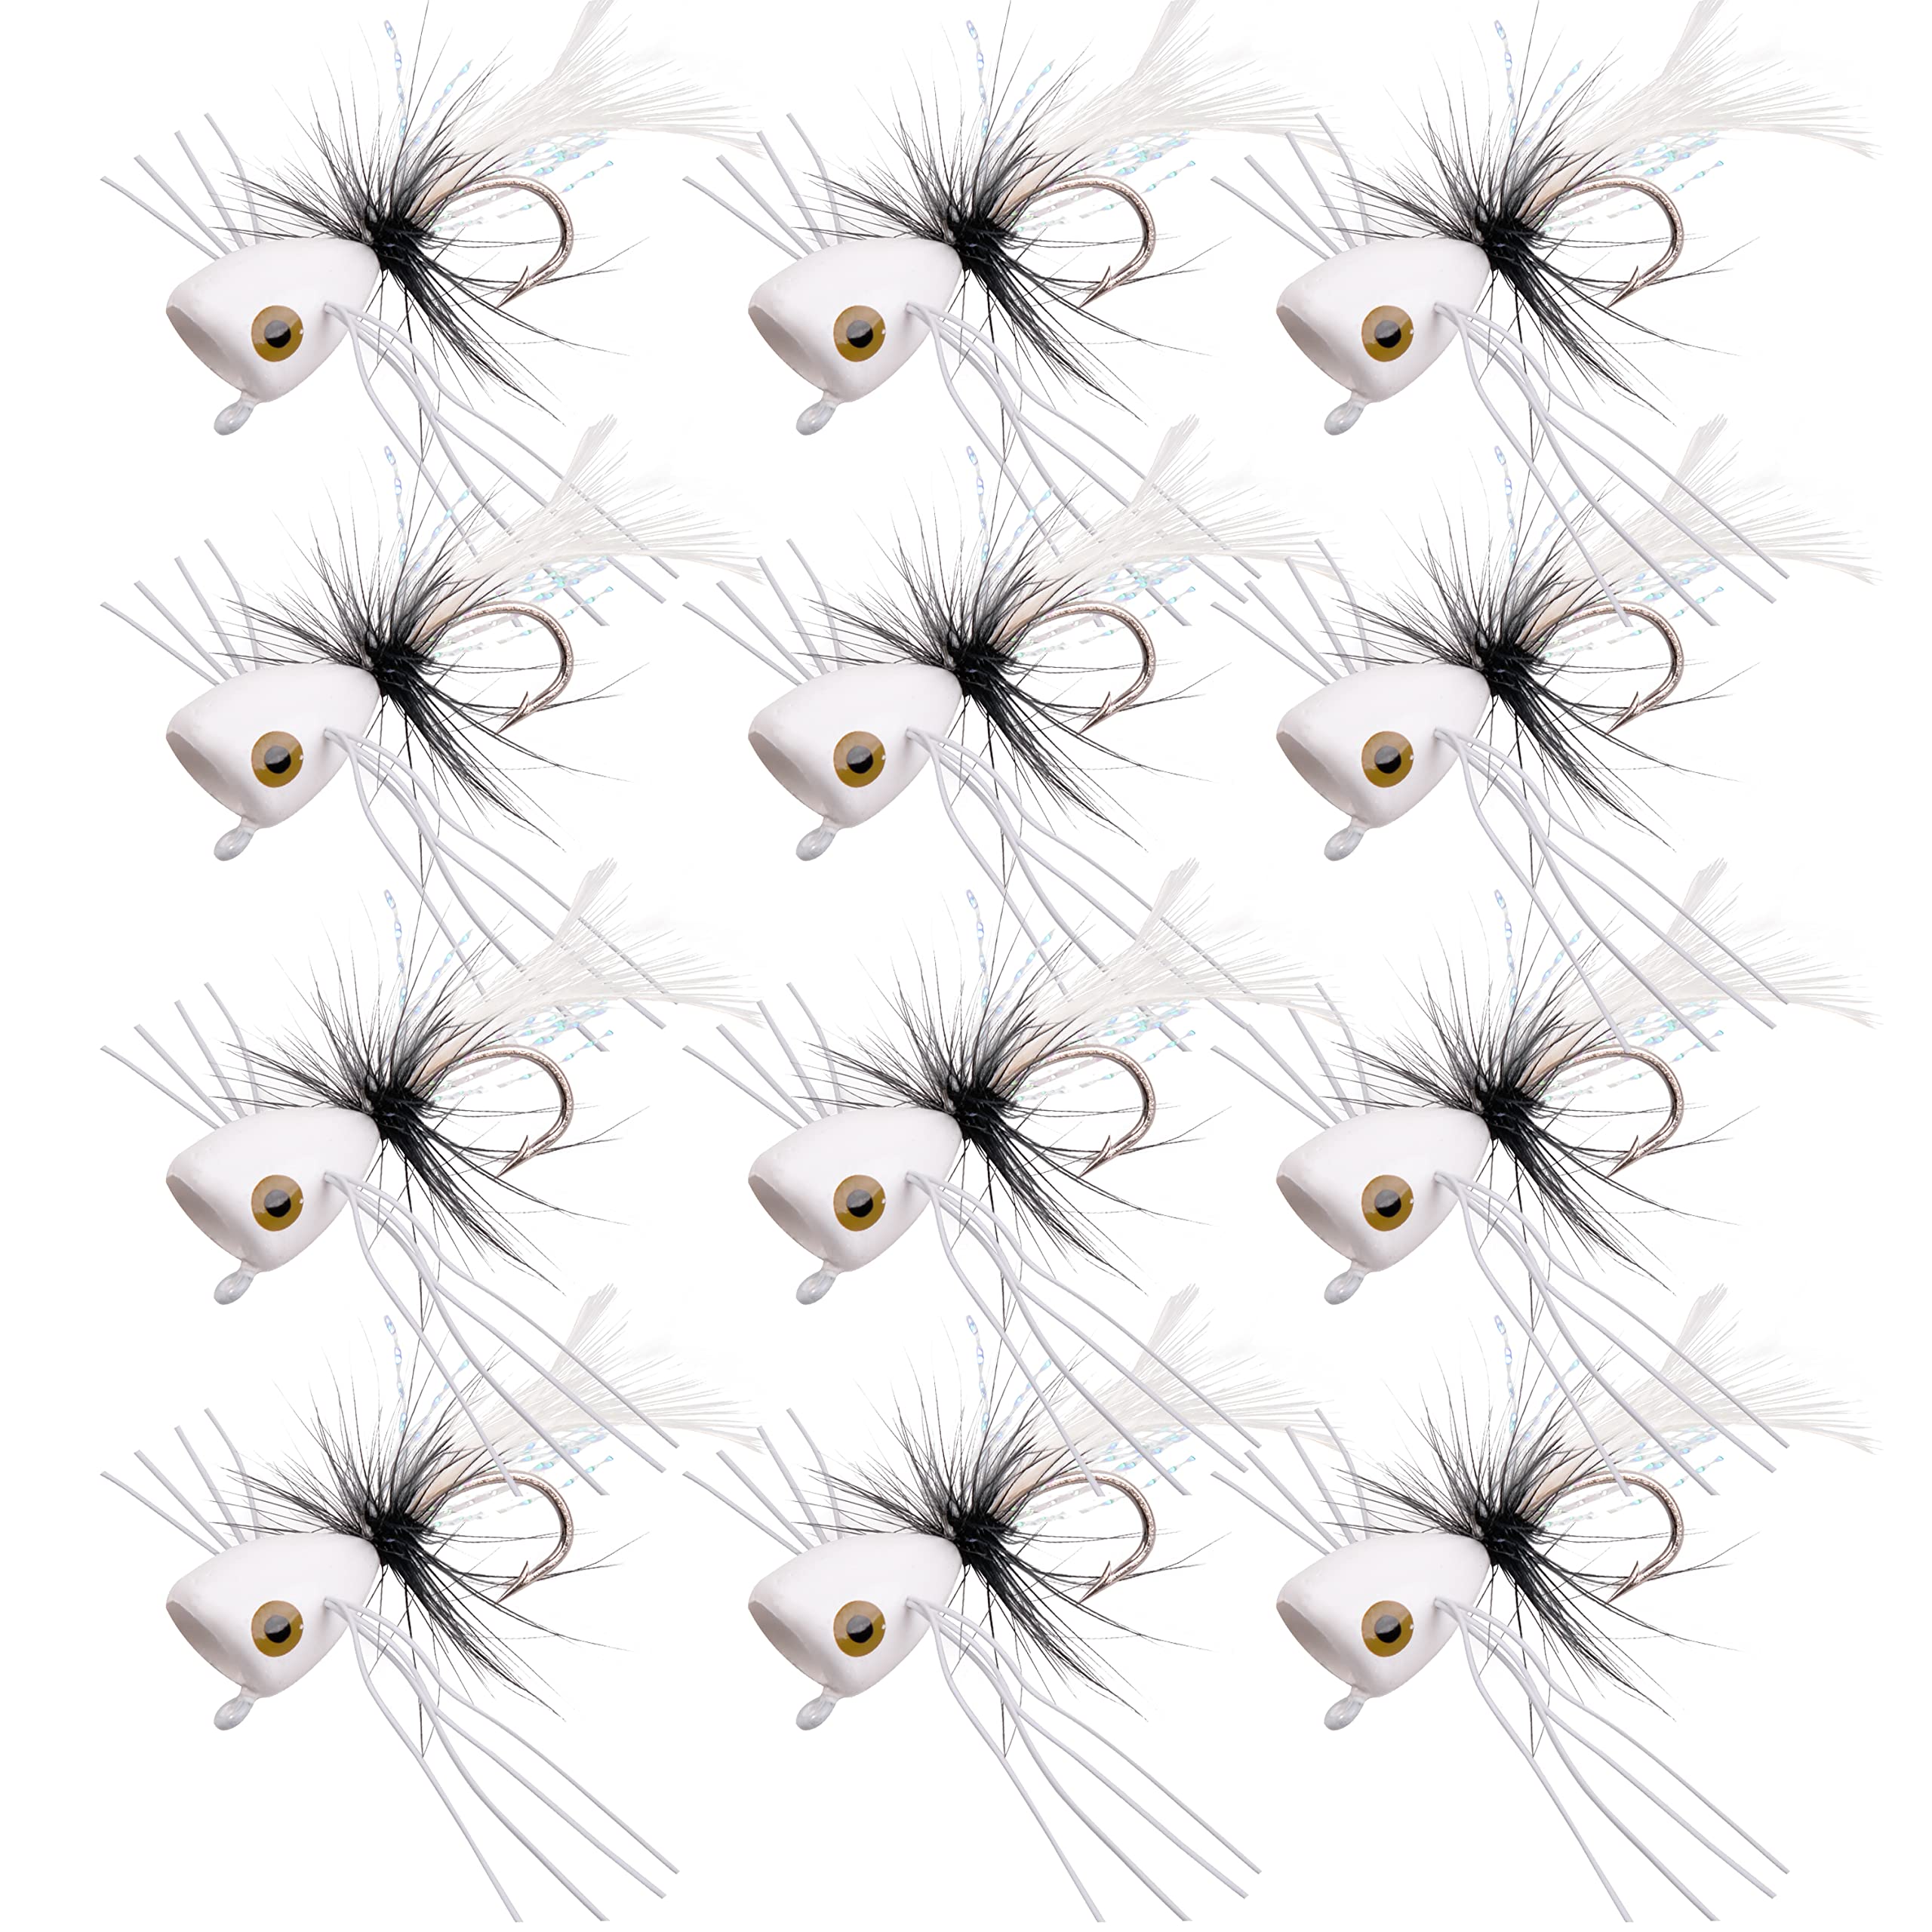 Fly Fishing Poppers, 12pcs Popper Flies for Fly Fishing Topwater